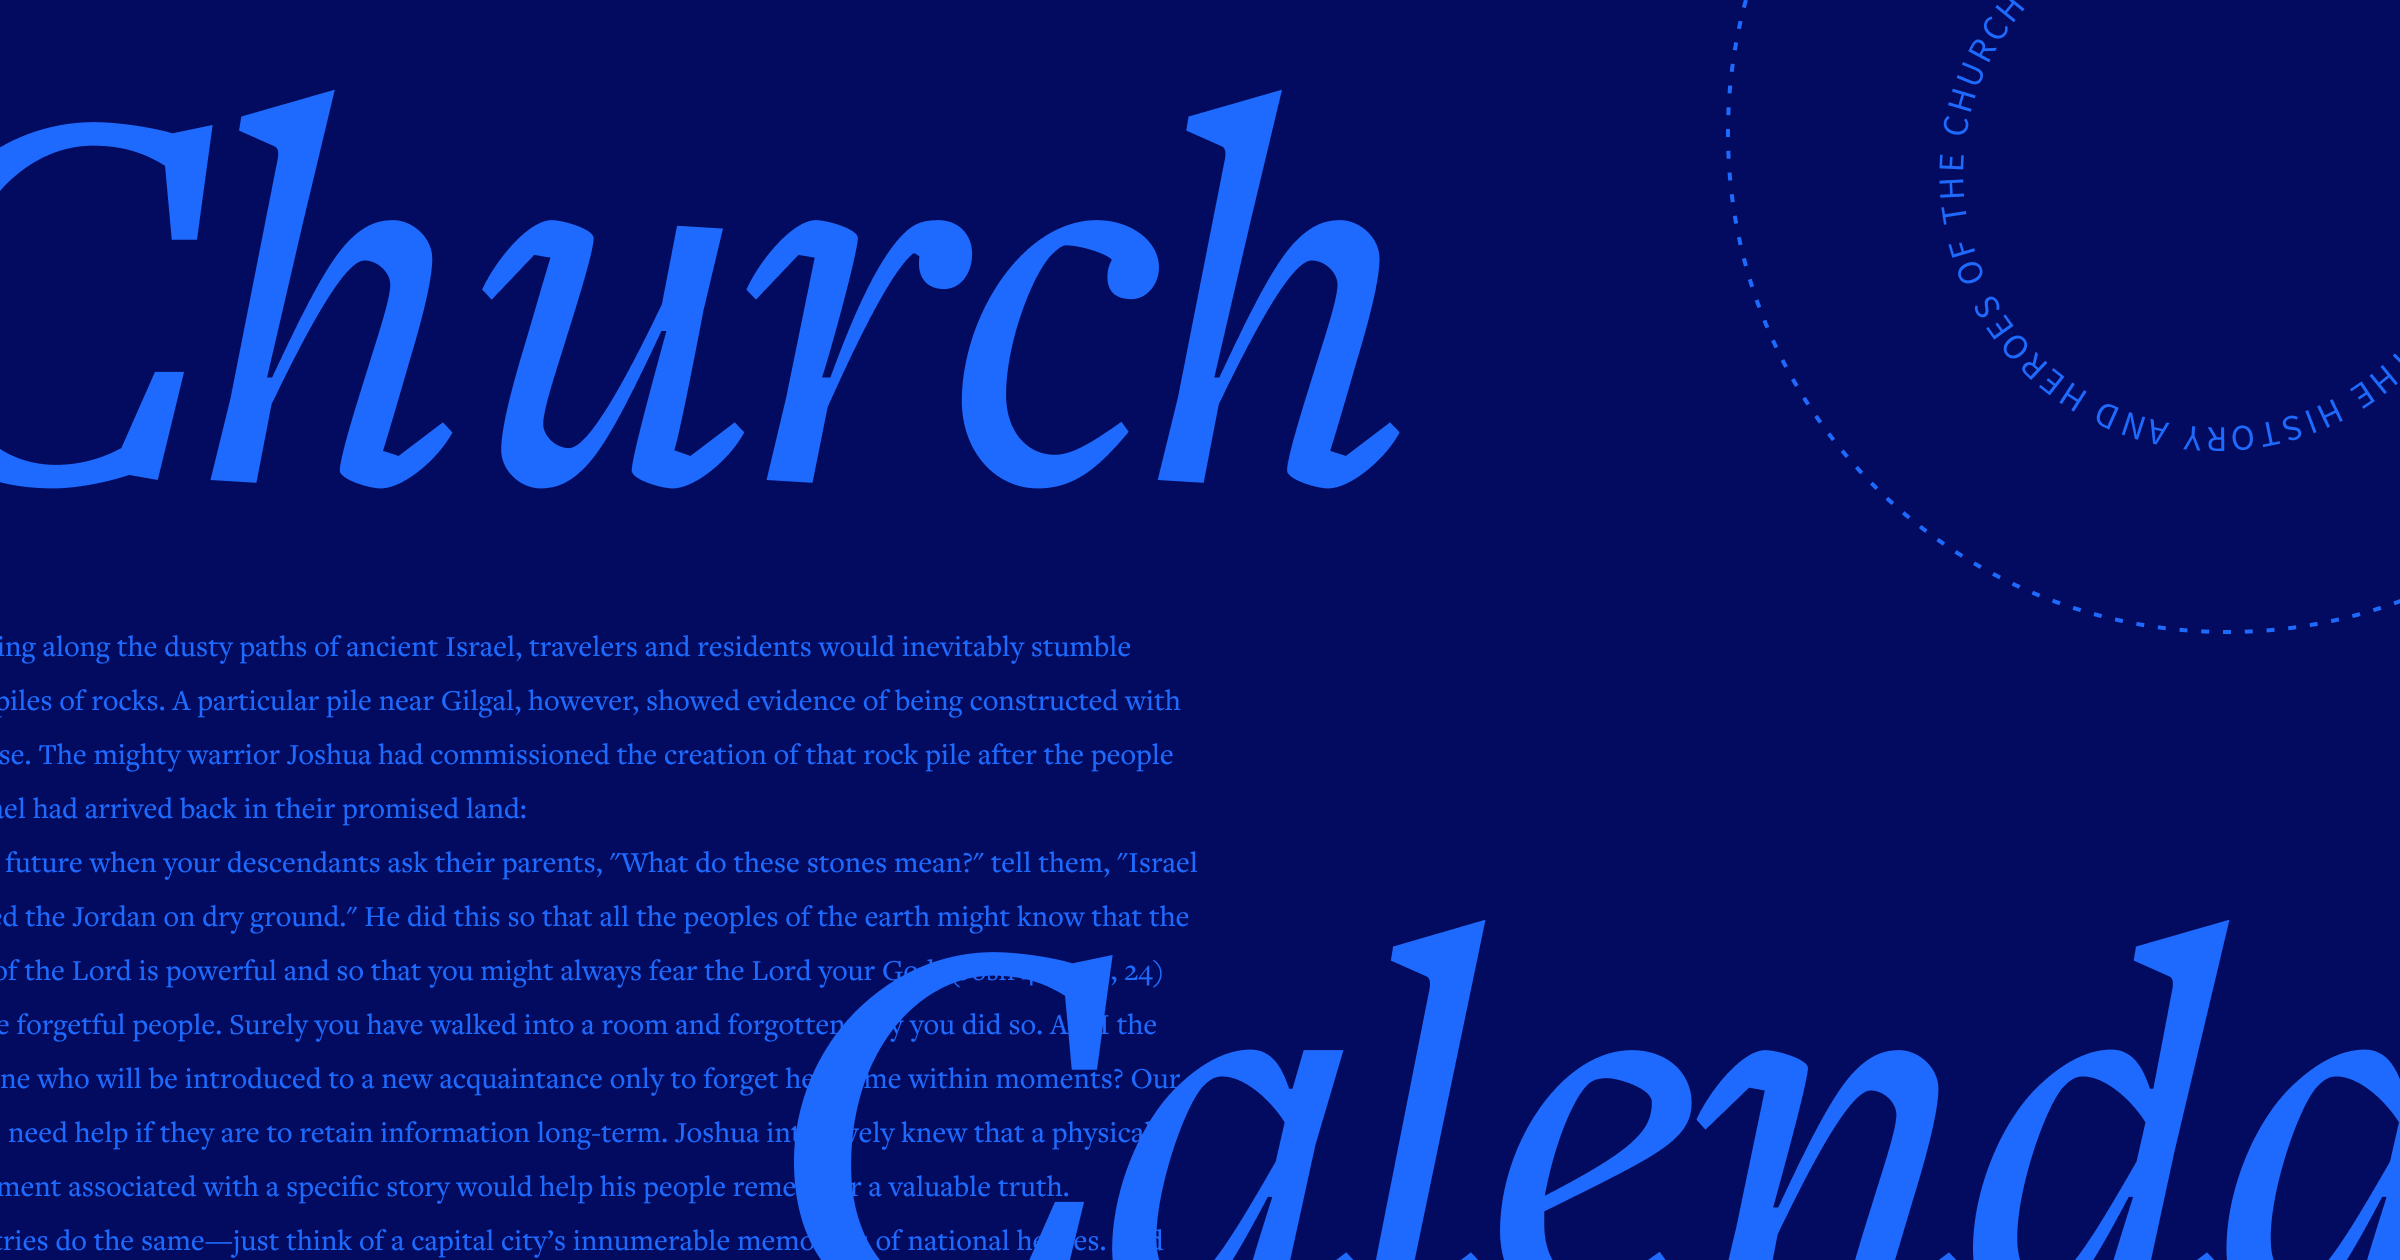 the words Church Calendar in large font with part of the article in the background.